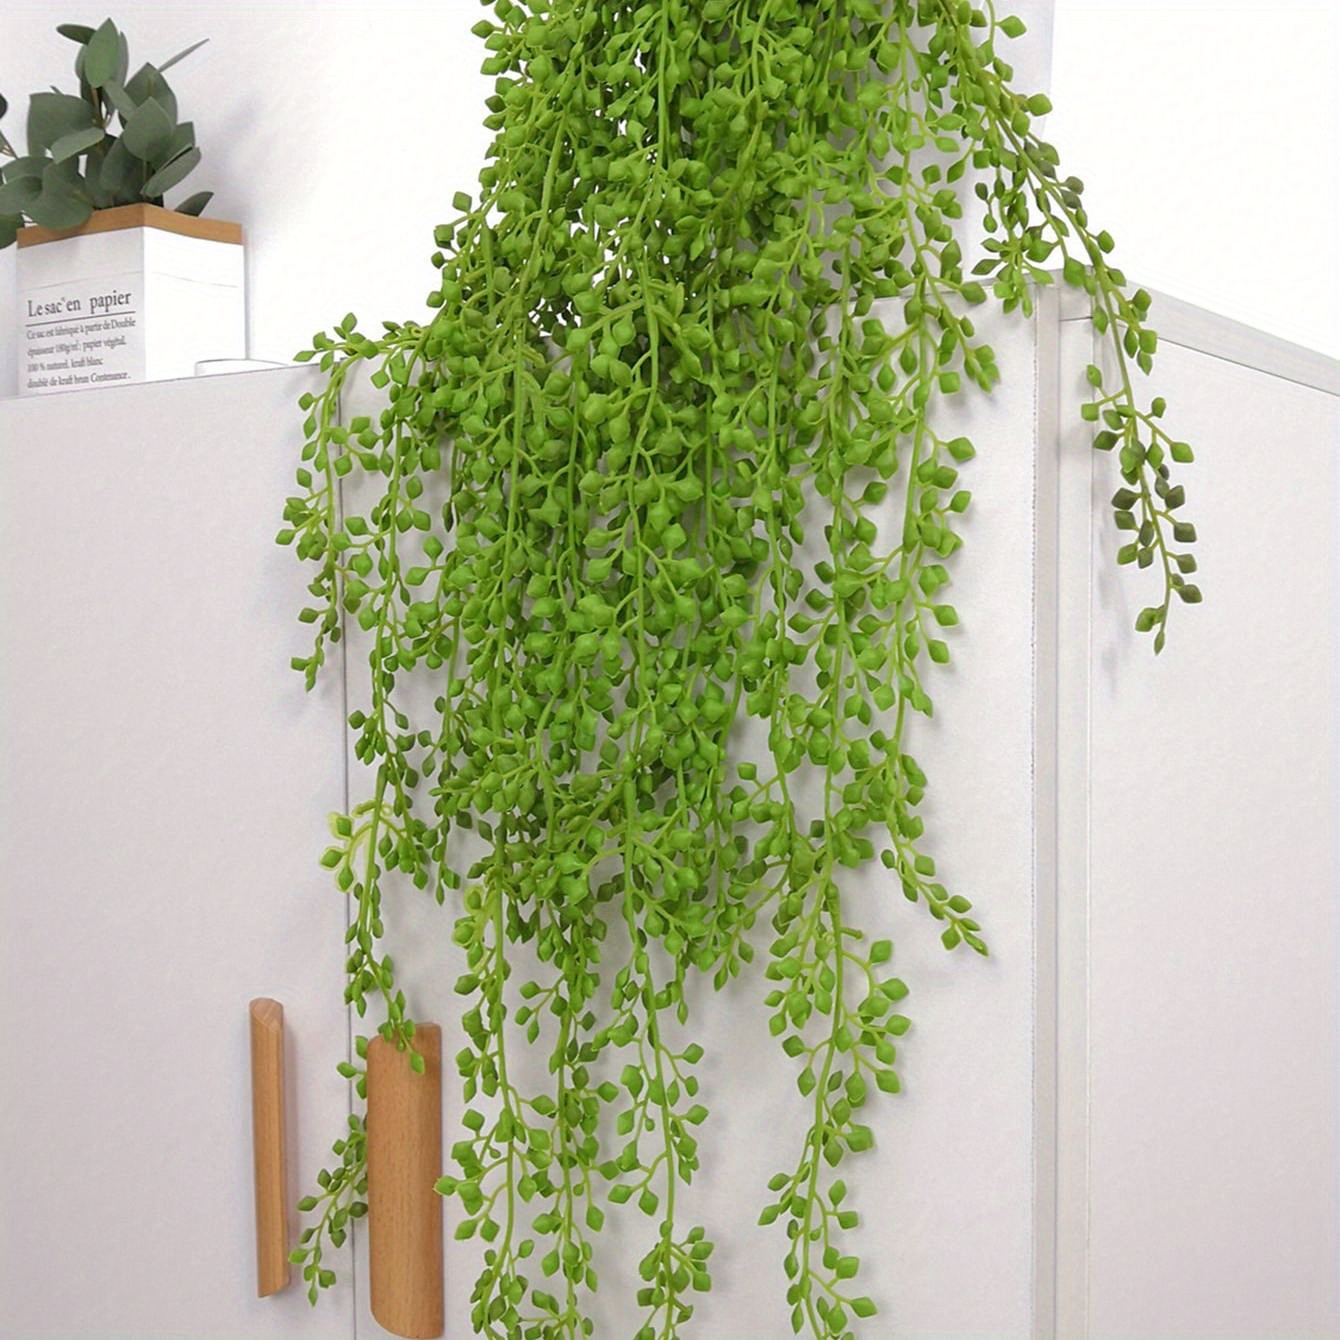 Green Artificial Succulents Plants Wall Hanging For Home Garden